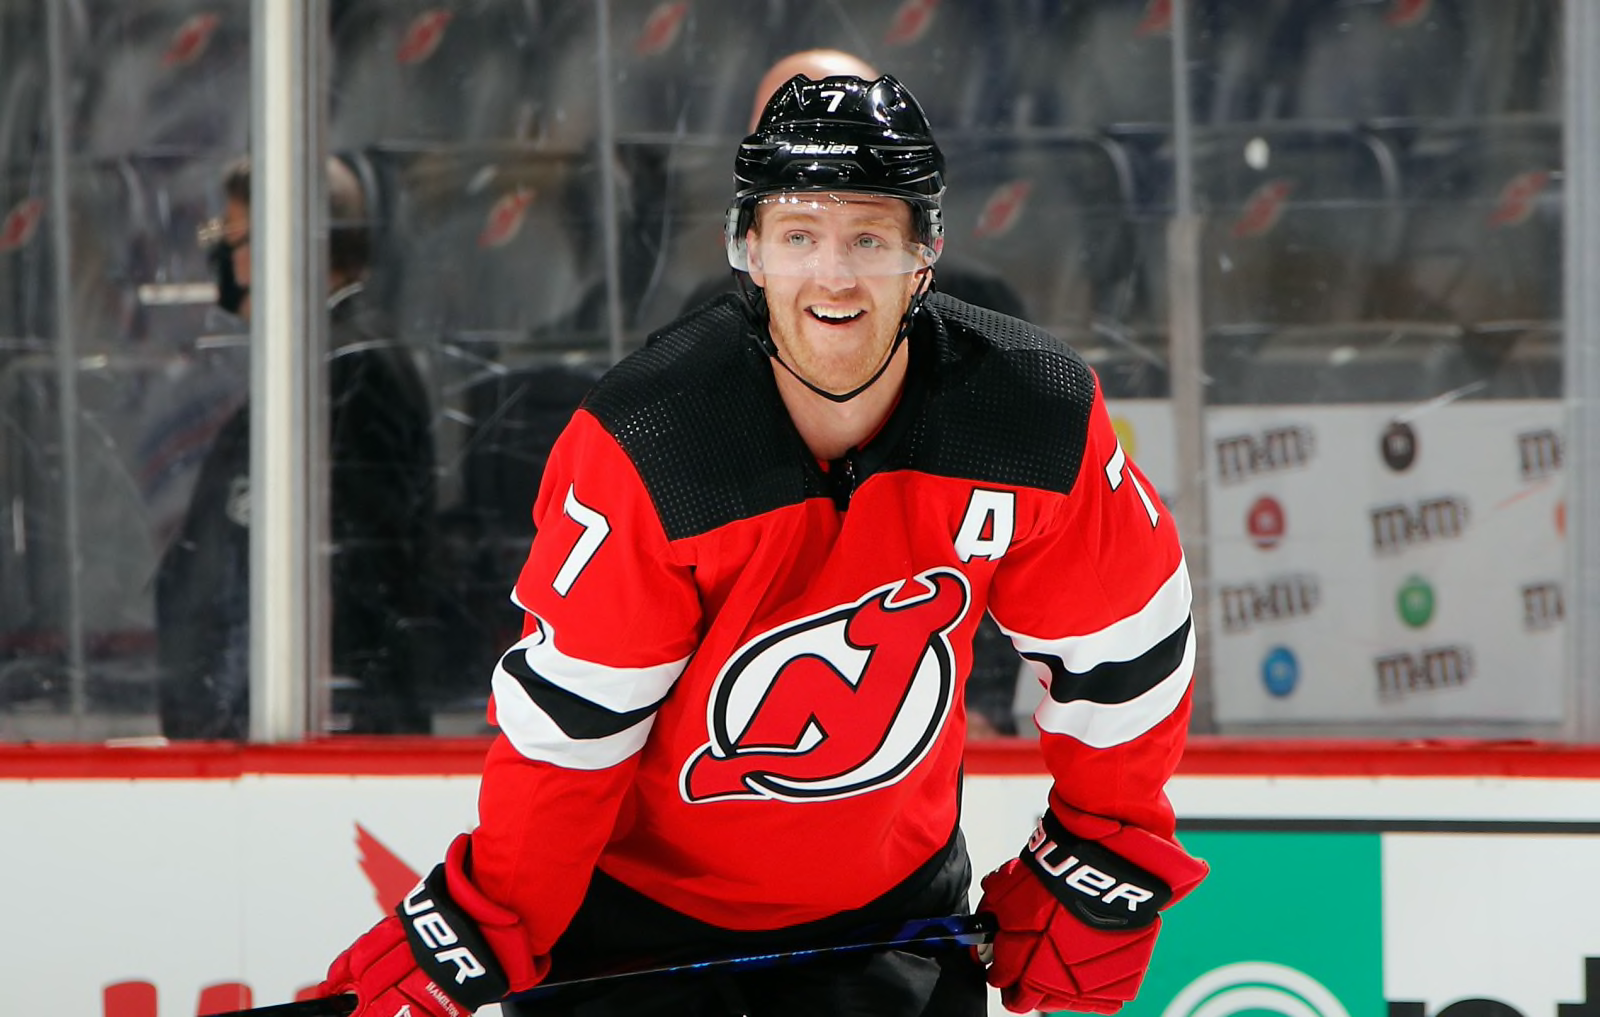 How Many Points Can We Expect from the Devils Top Players?